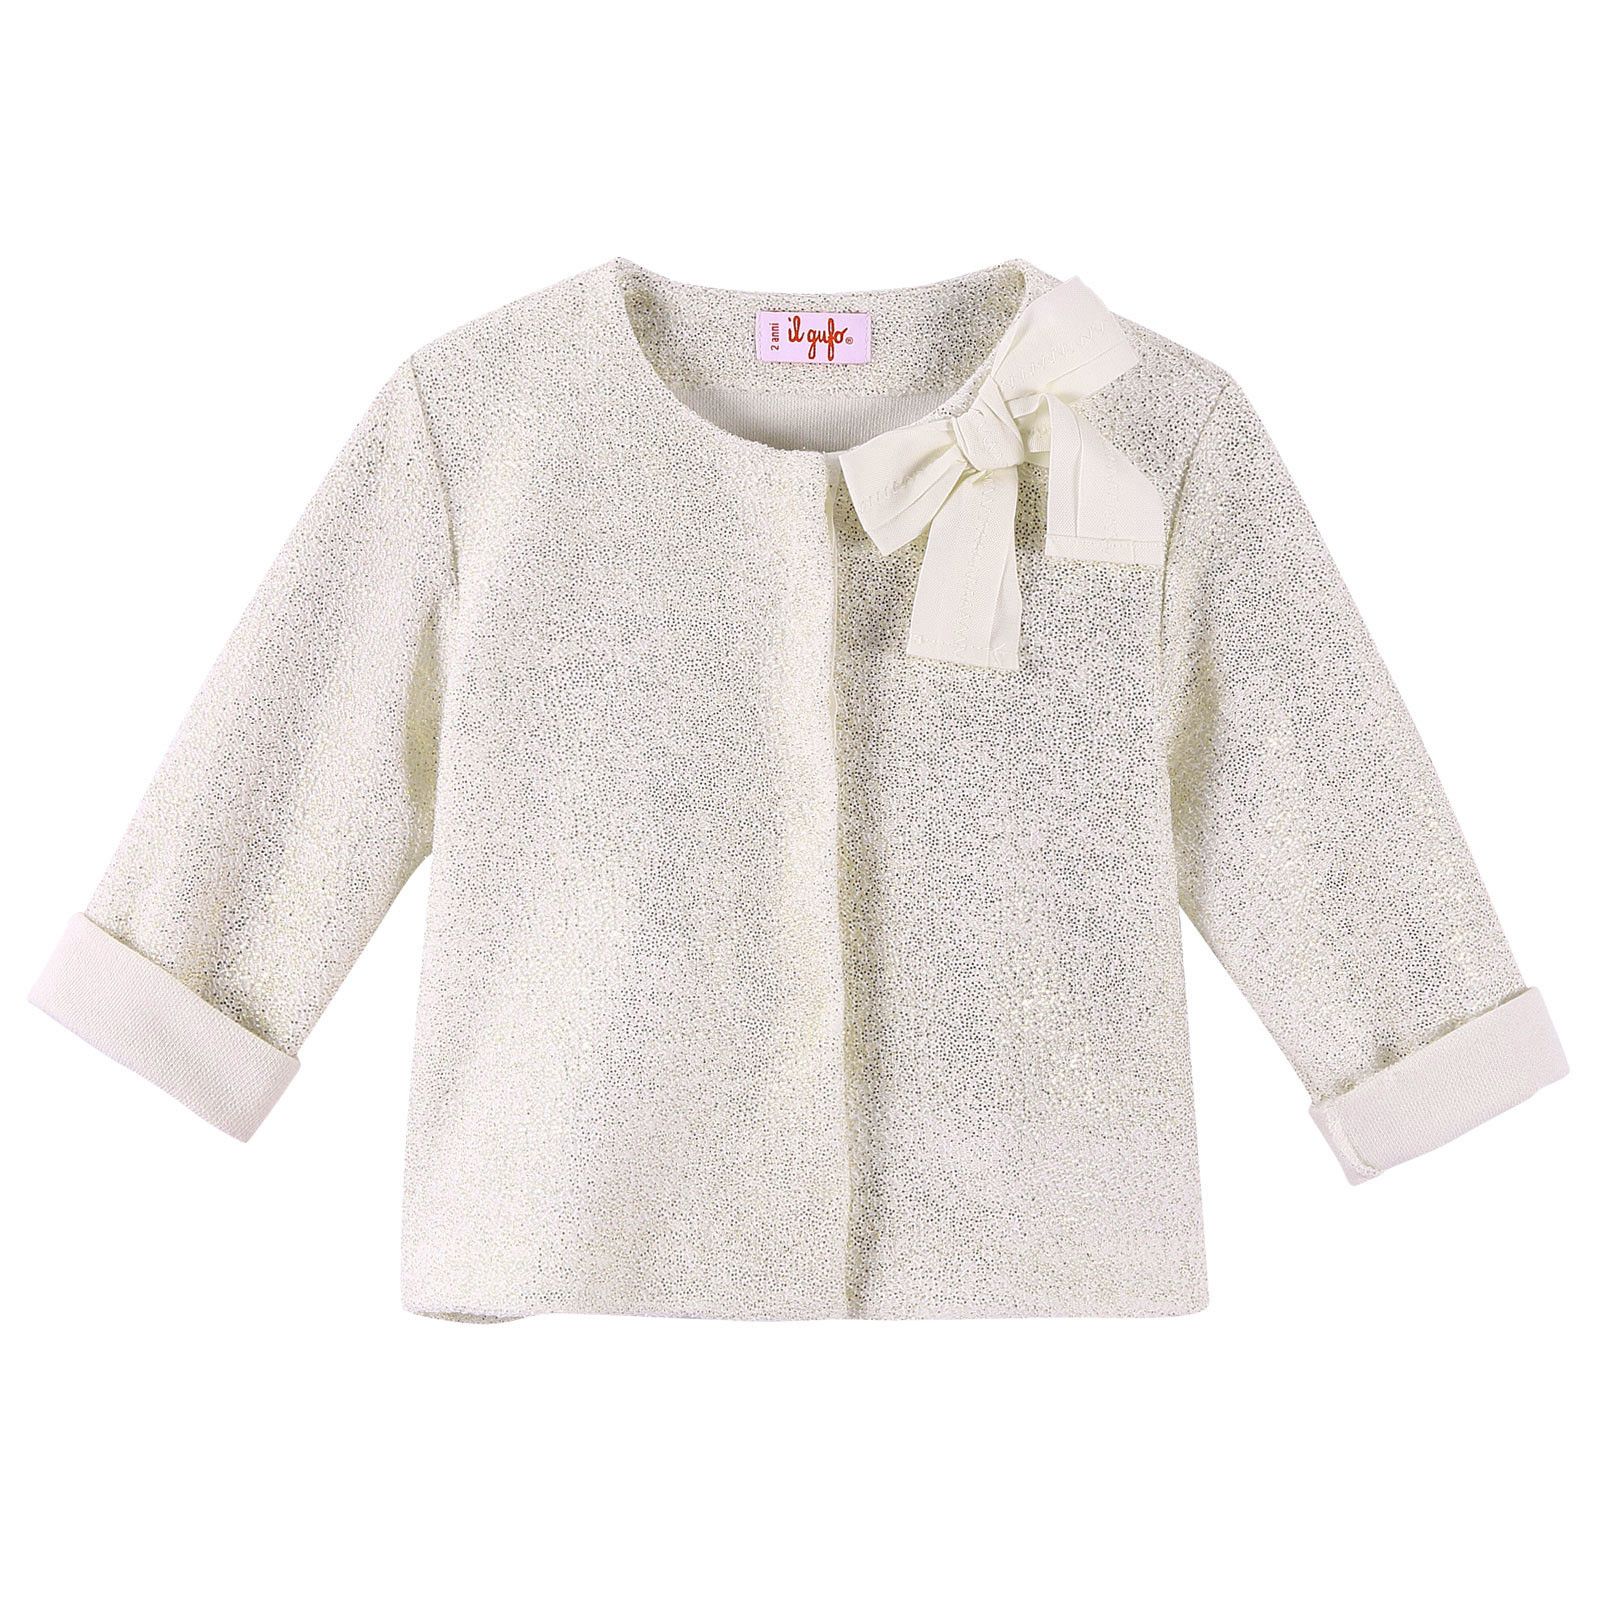 Girls White&Gold Particle Blouse With Bow Trims - CÉMAROSE | Children's Fashion Store - 1